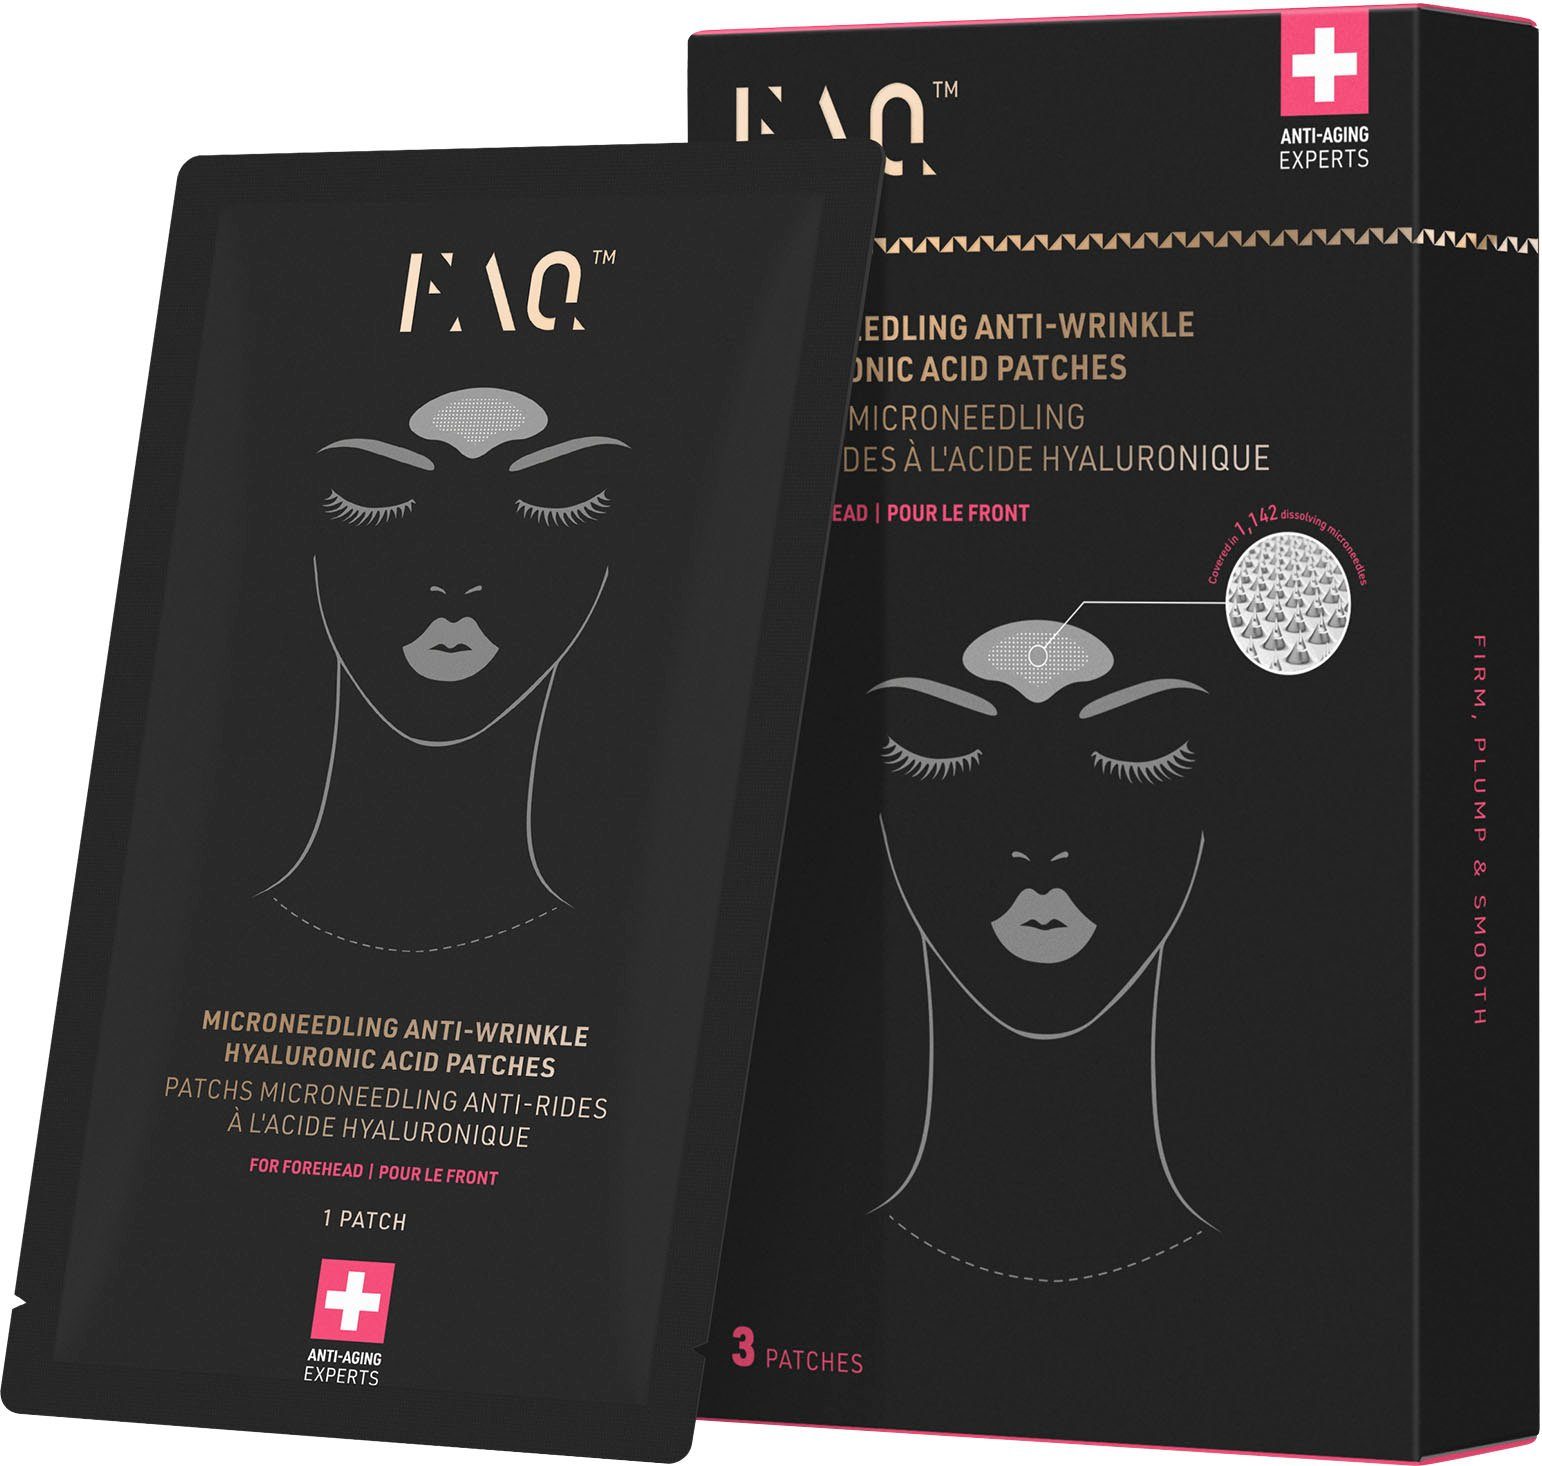 For Acid Hyaluronic Microneedling Hyaluron FAQ™ Patches Forehead FAQ™ Anti-Wrinkle Serum